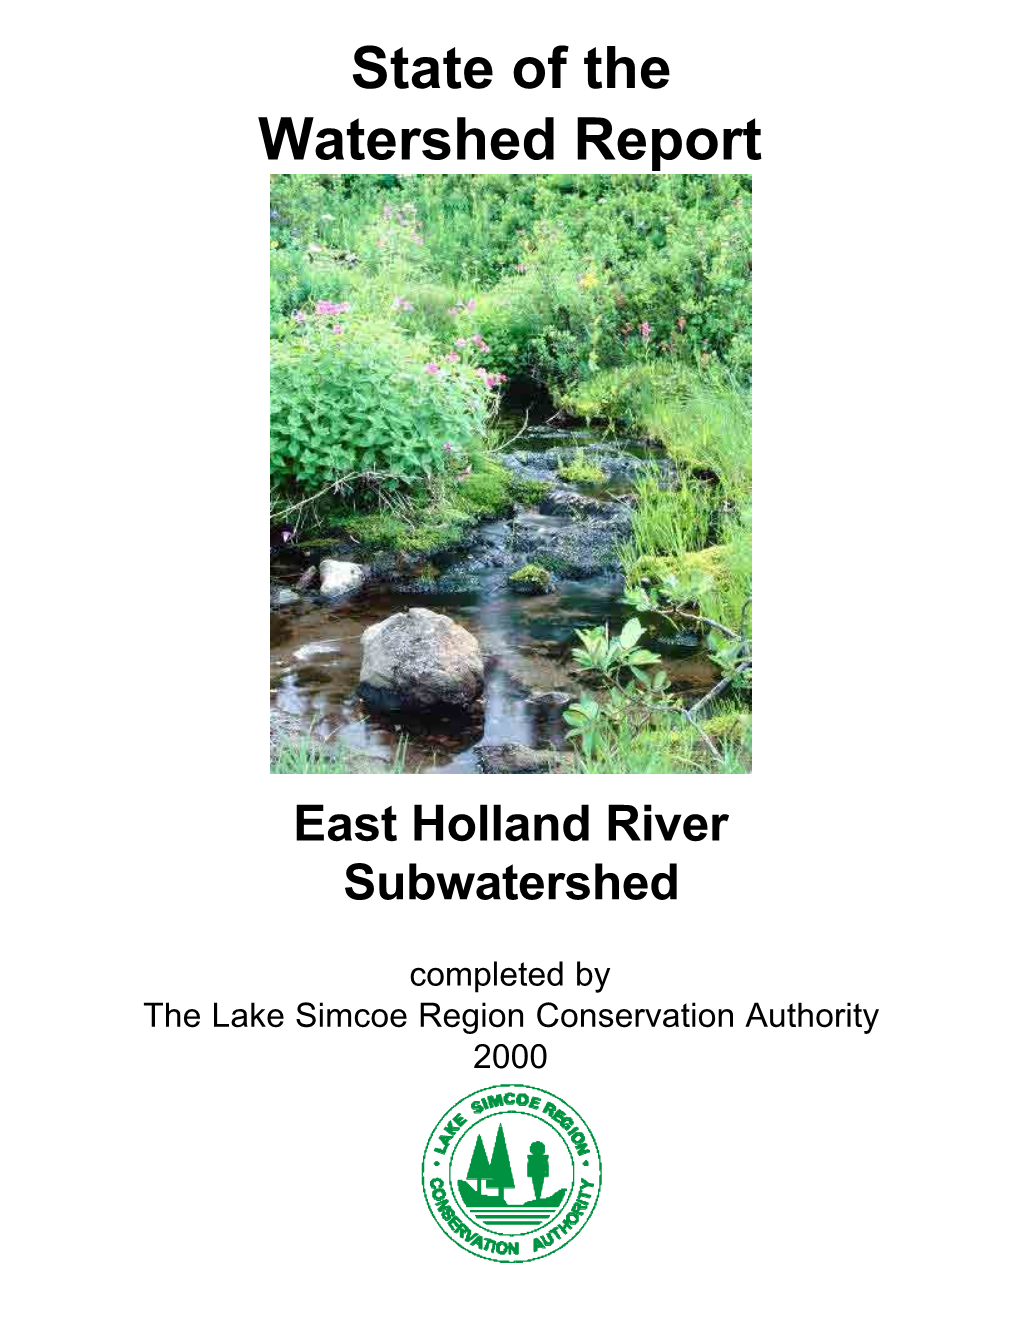 State of the Watershed Report